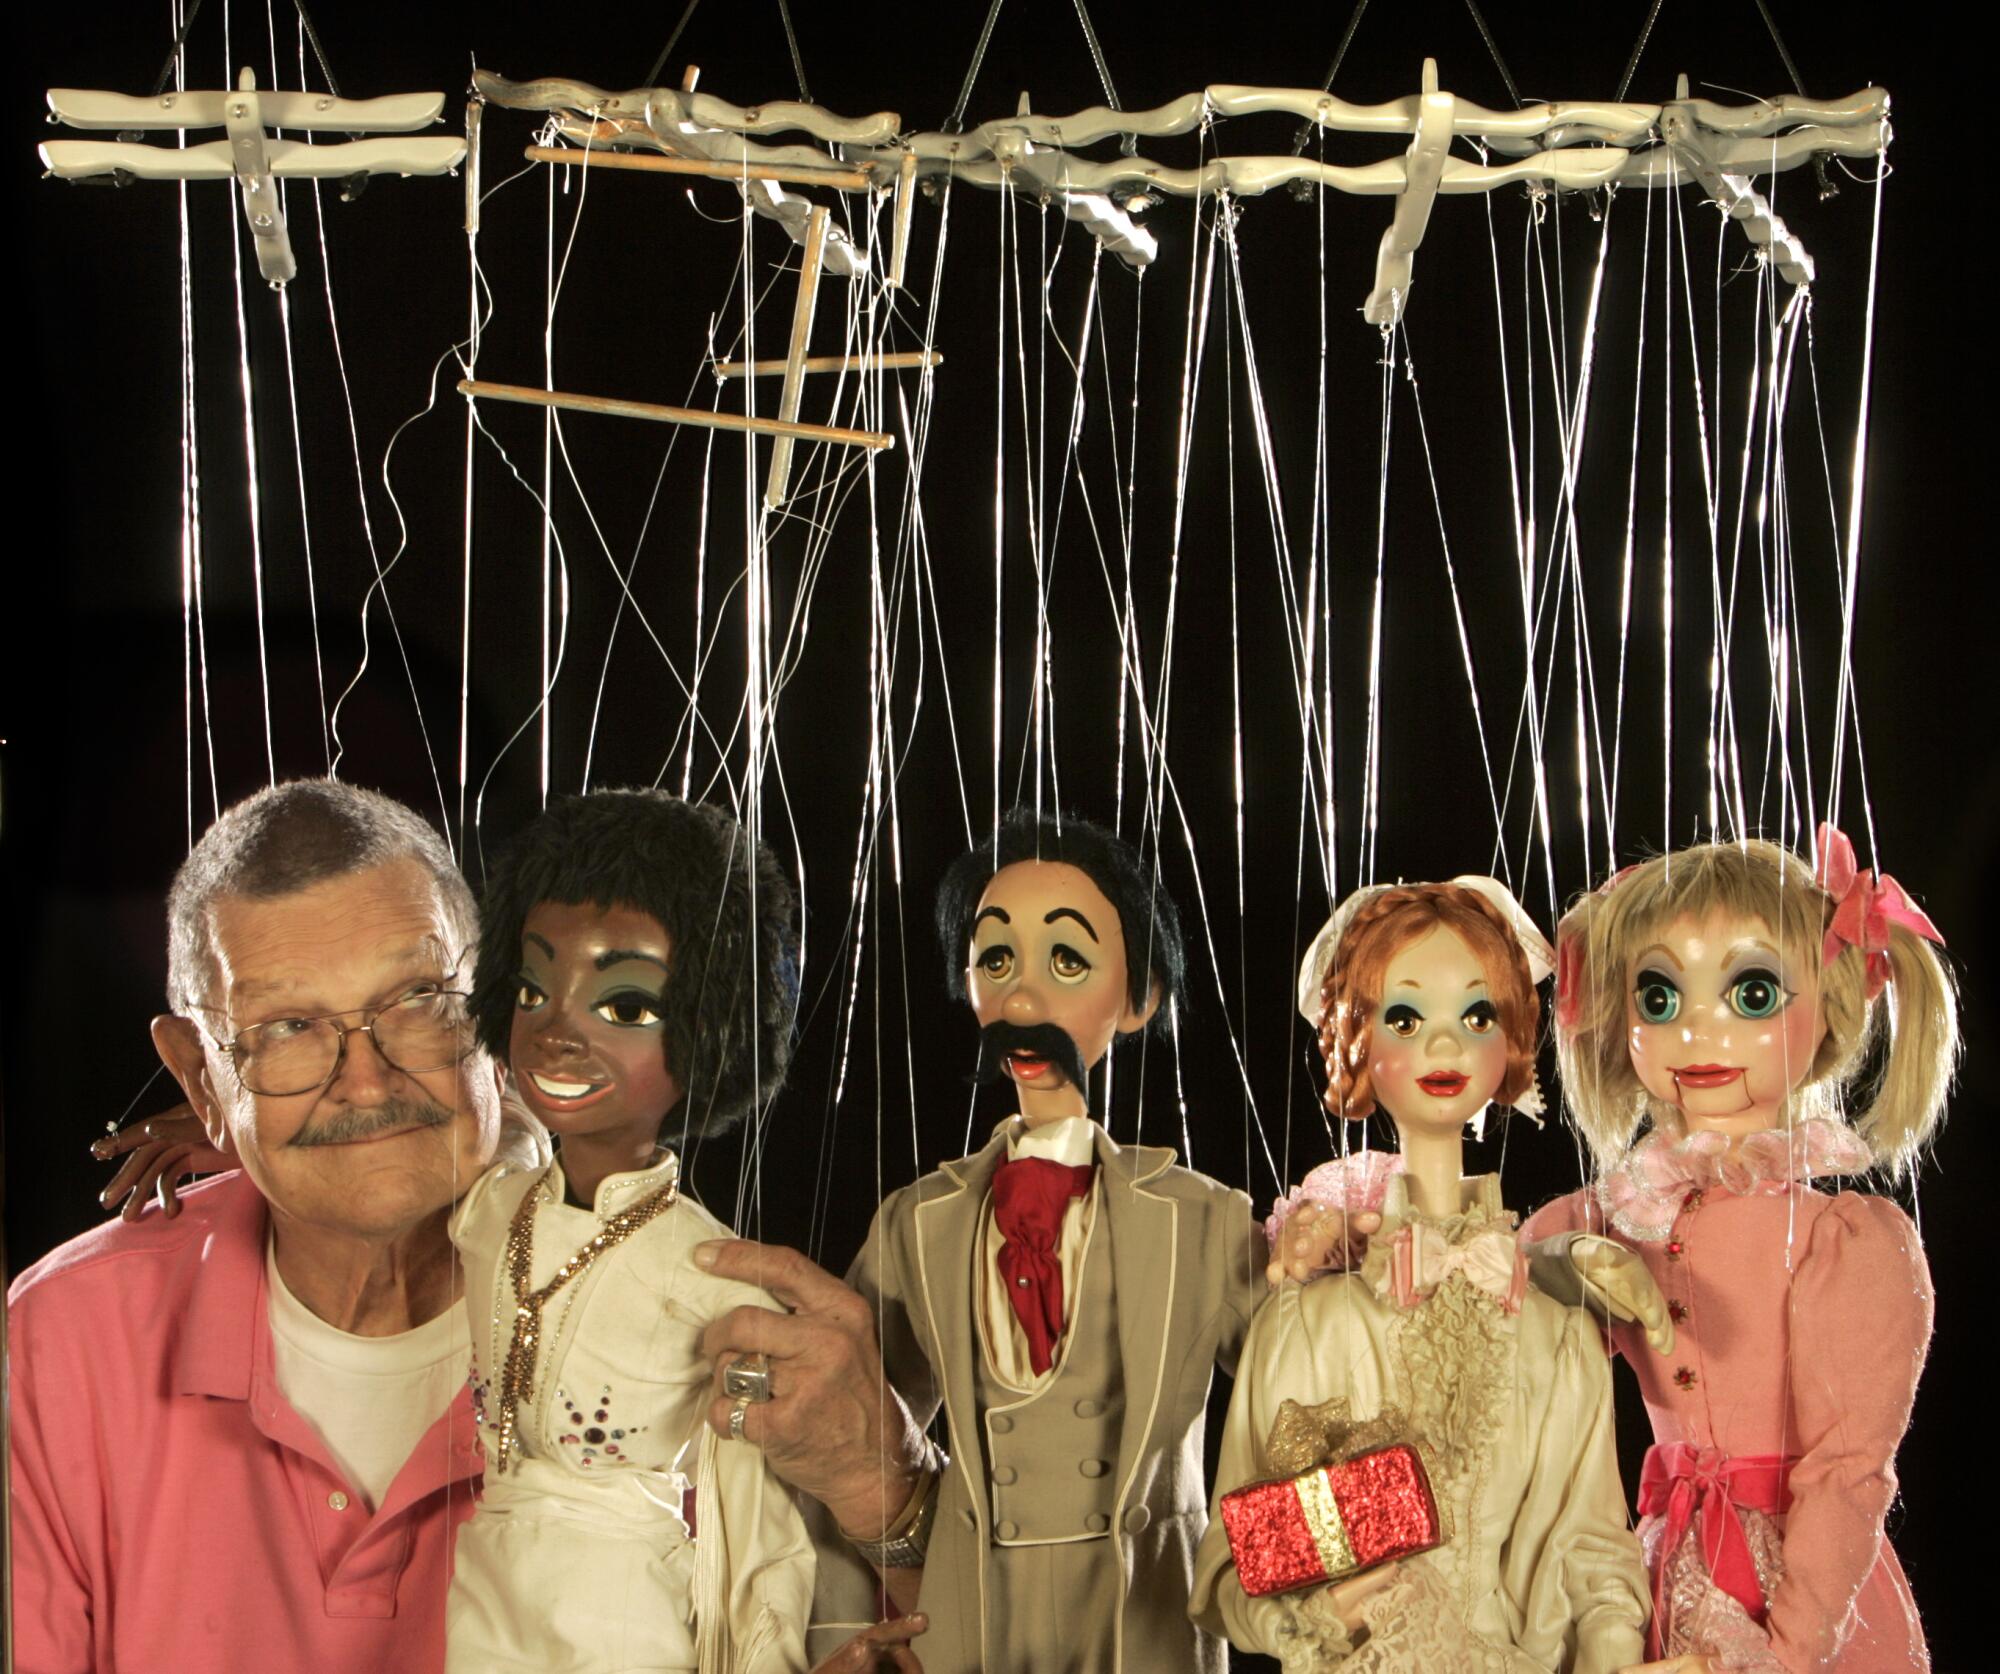 Bob Baker dies at 90; puppeteer ran beloved theater, worked with